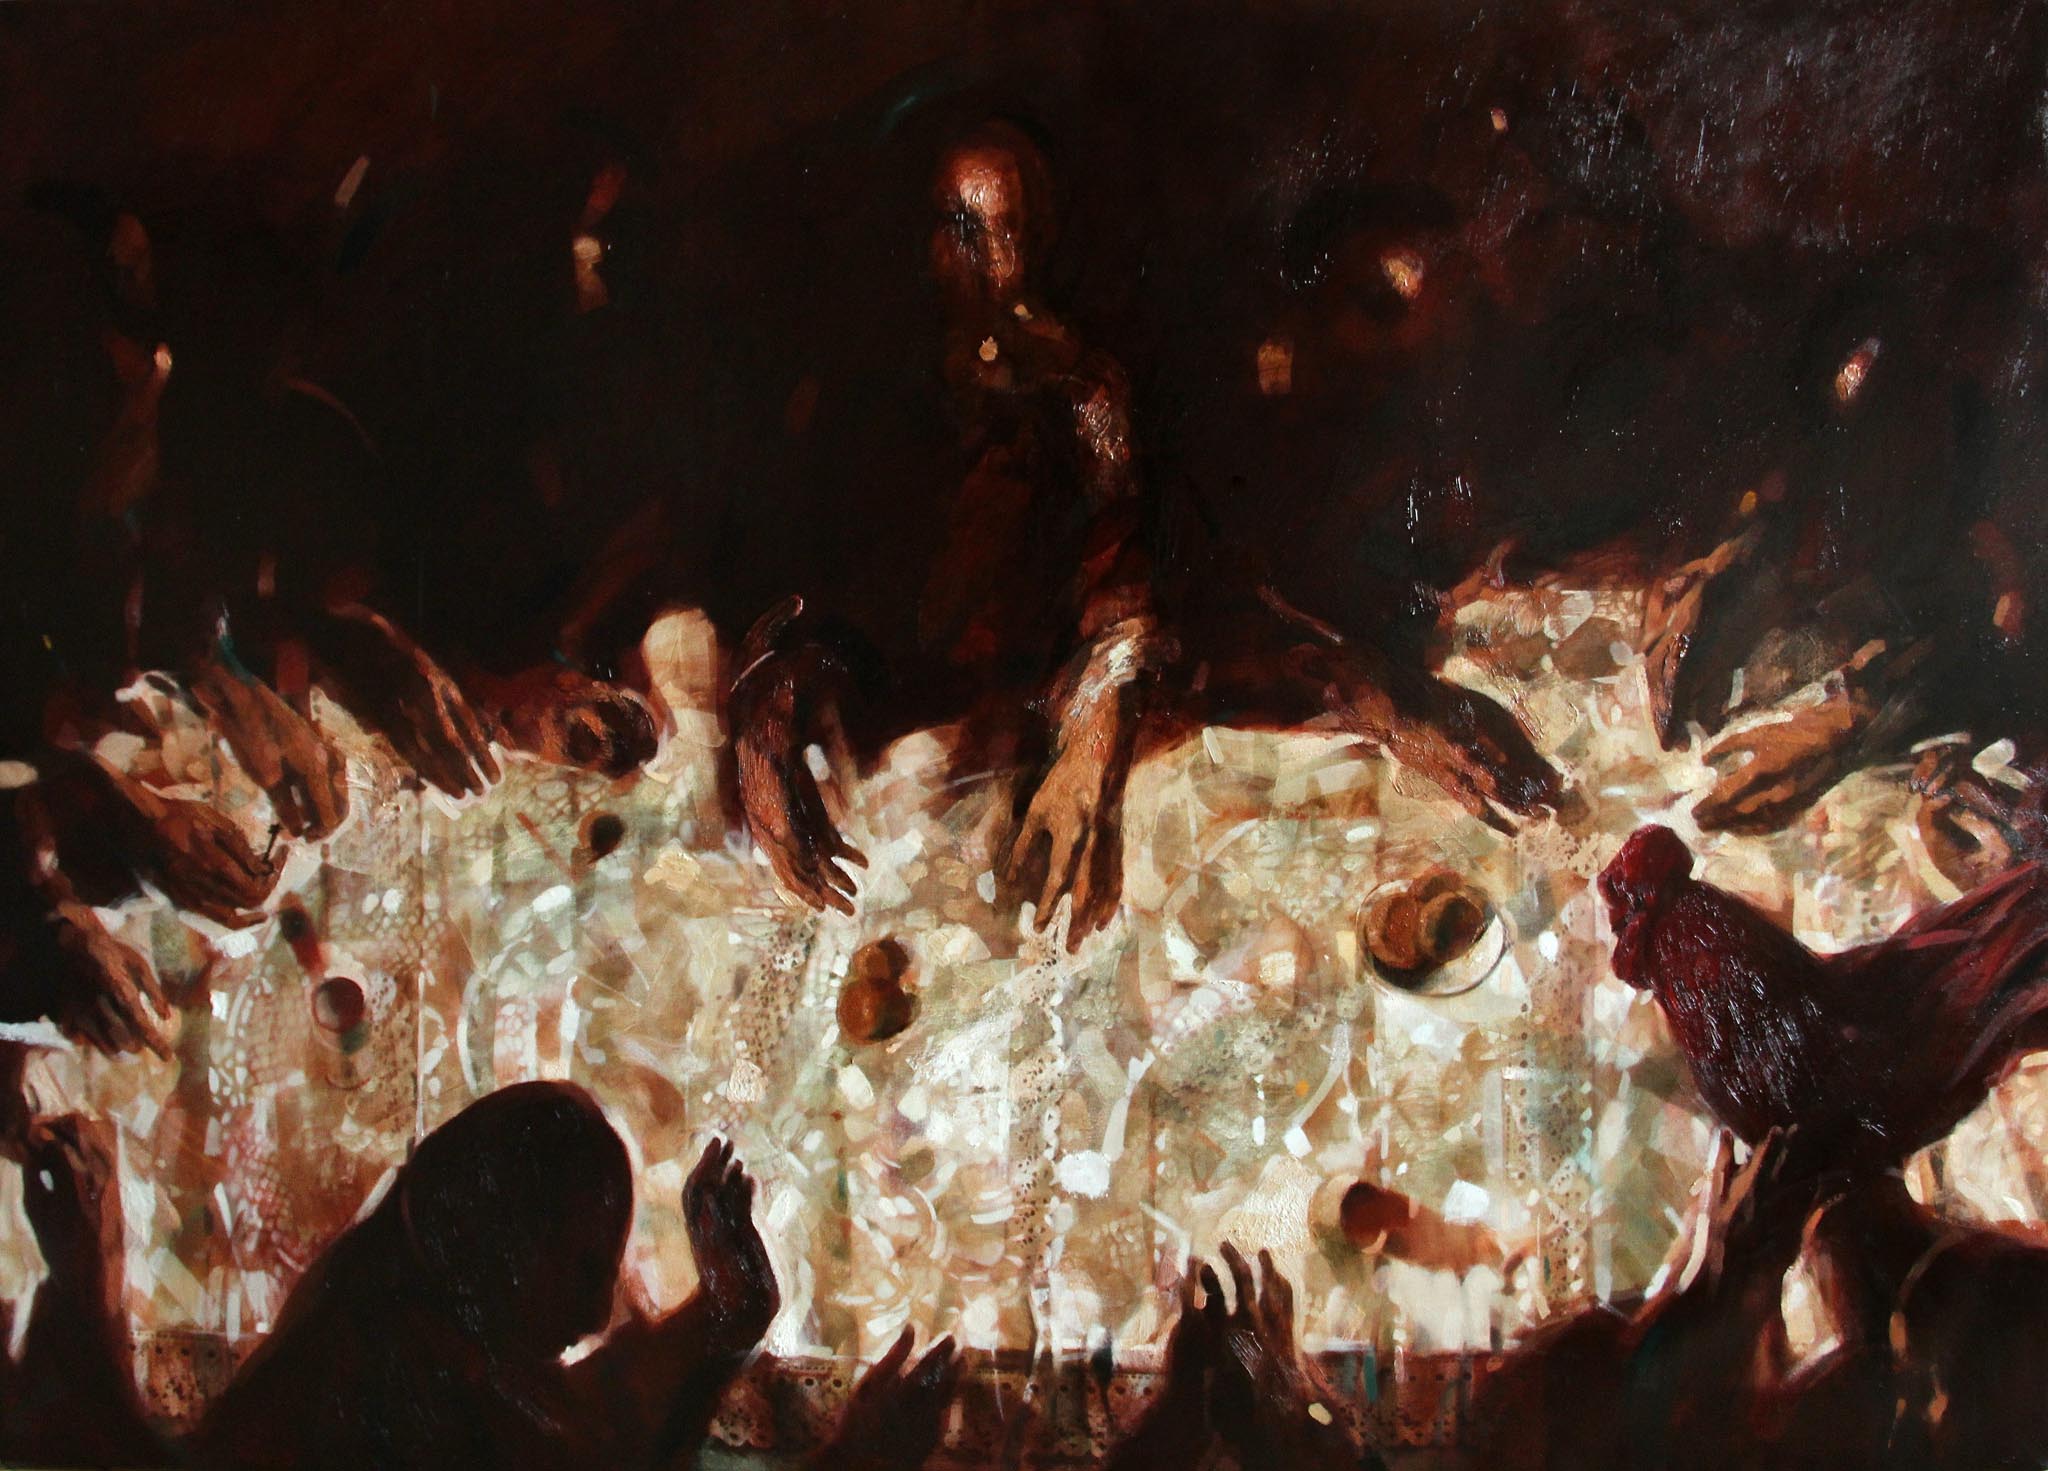 "Last Supper". 2015, Oil on Canvas, 135x190cm